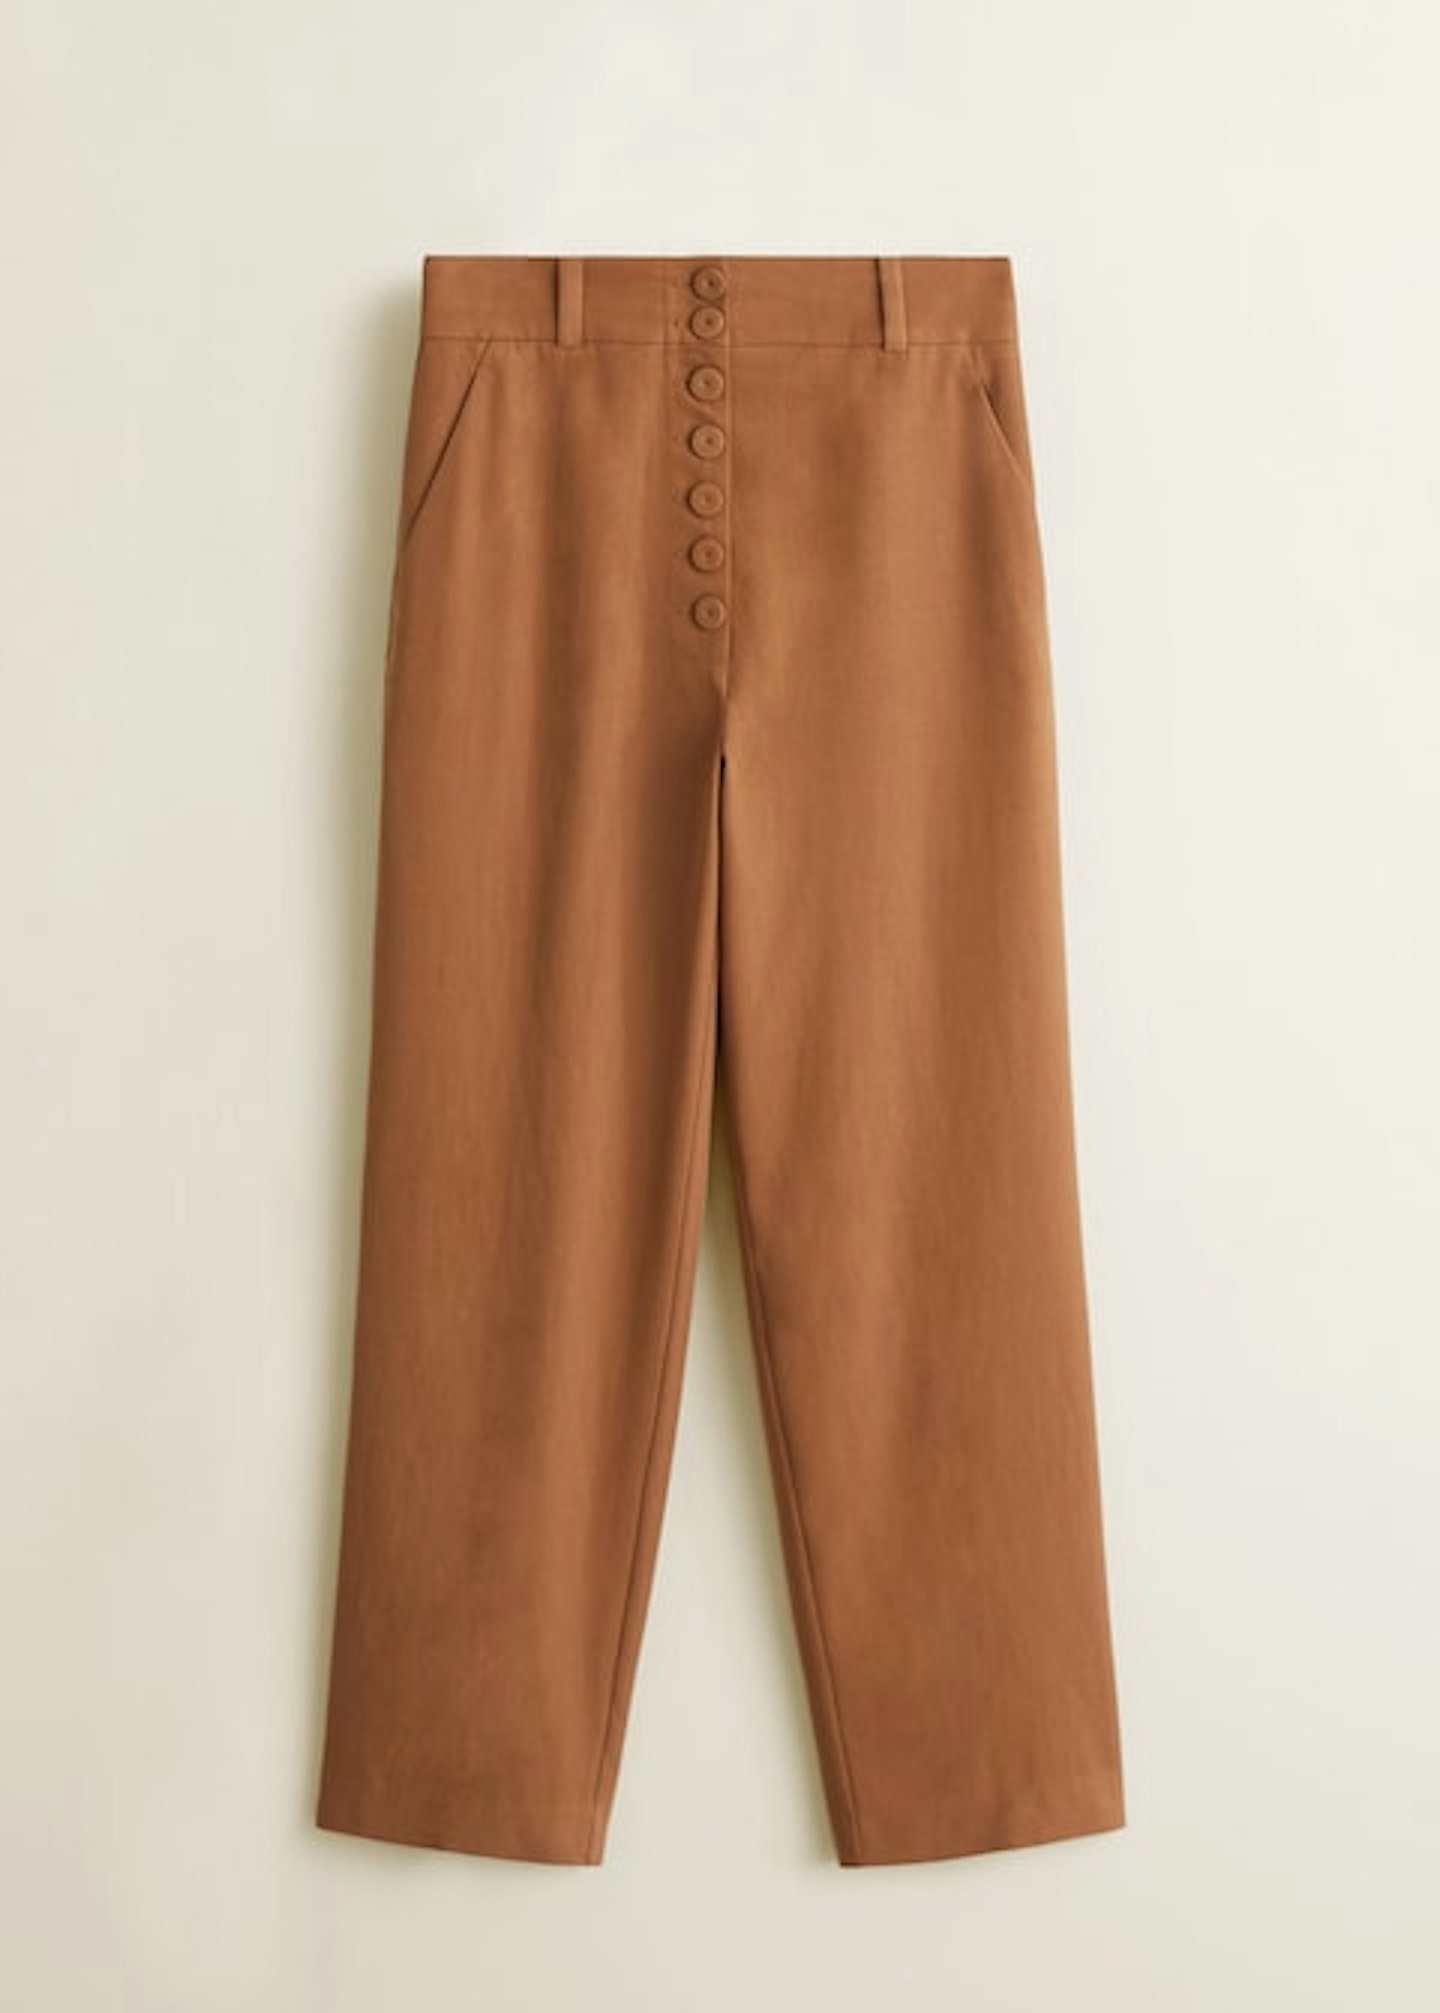 Mango, Buttoned Soft Fabric Trousers